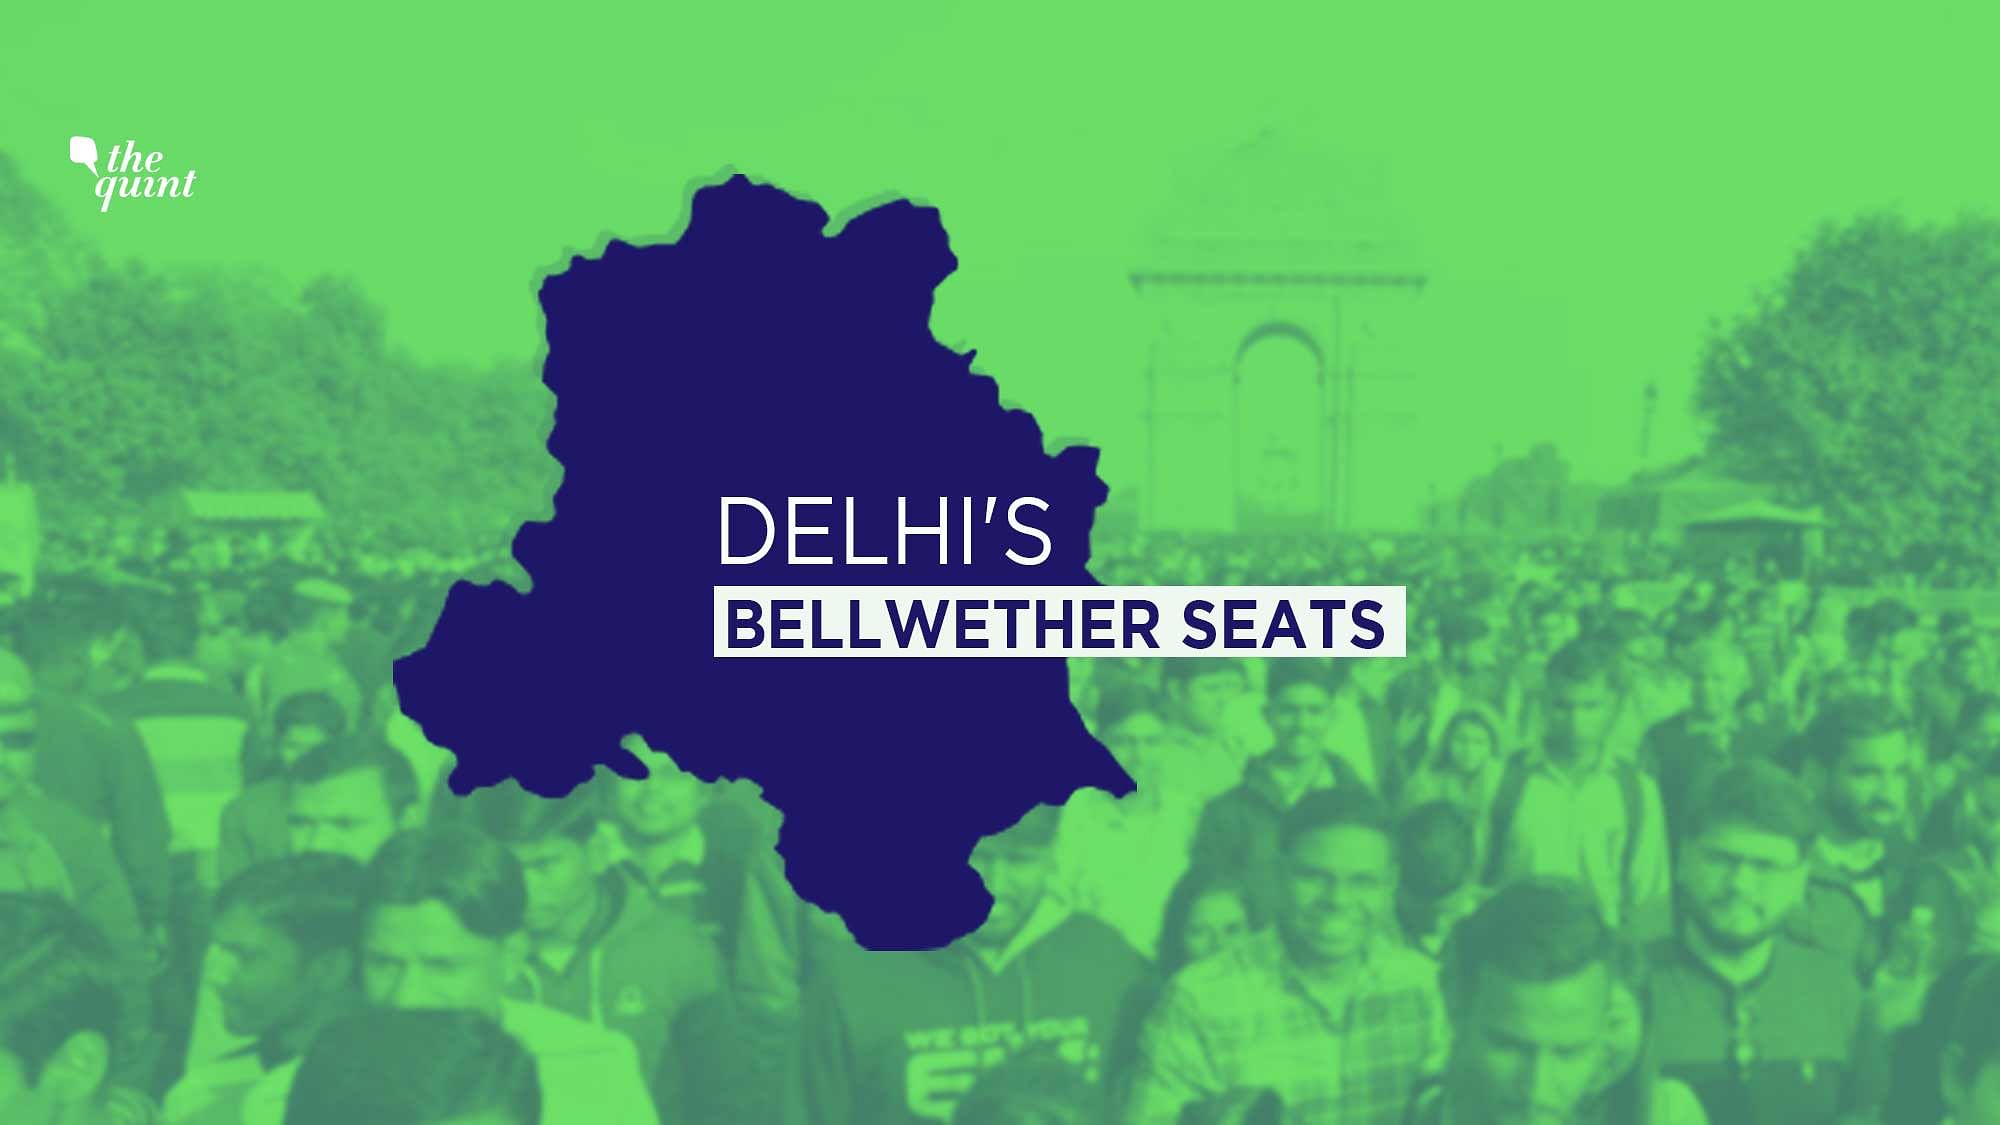 As many as 19 out of 70 seats in Delhi can be considered bellwether seats